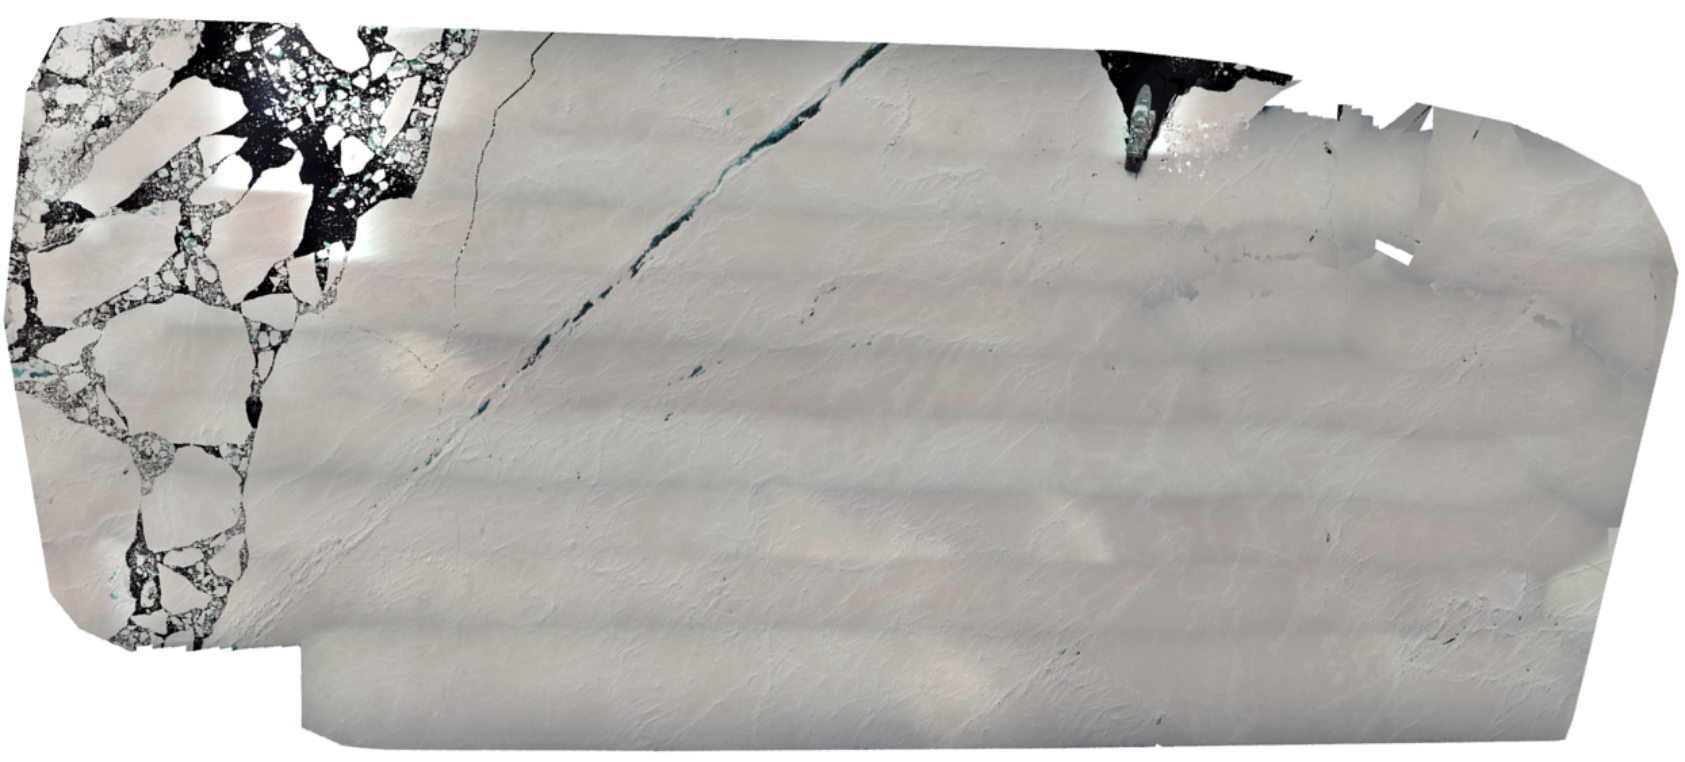 Tom Rune Lauknes/NORCE, Drone orthomosaic of the fieldwork area. KV Svalbard was attached to a large ice floe with ridges of drifted snow or pressure ridges, and a large crack and open sea ice on the left side., Figure 62, , 